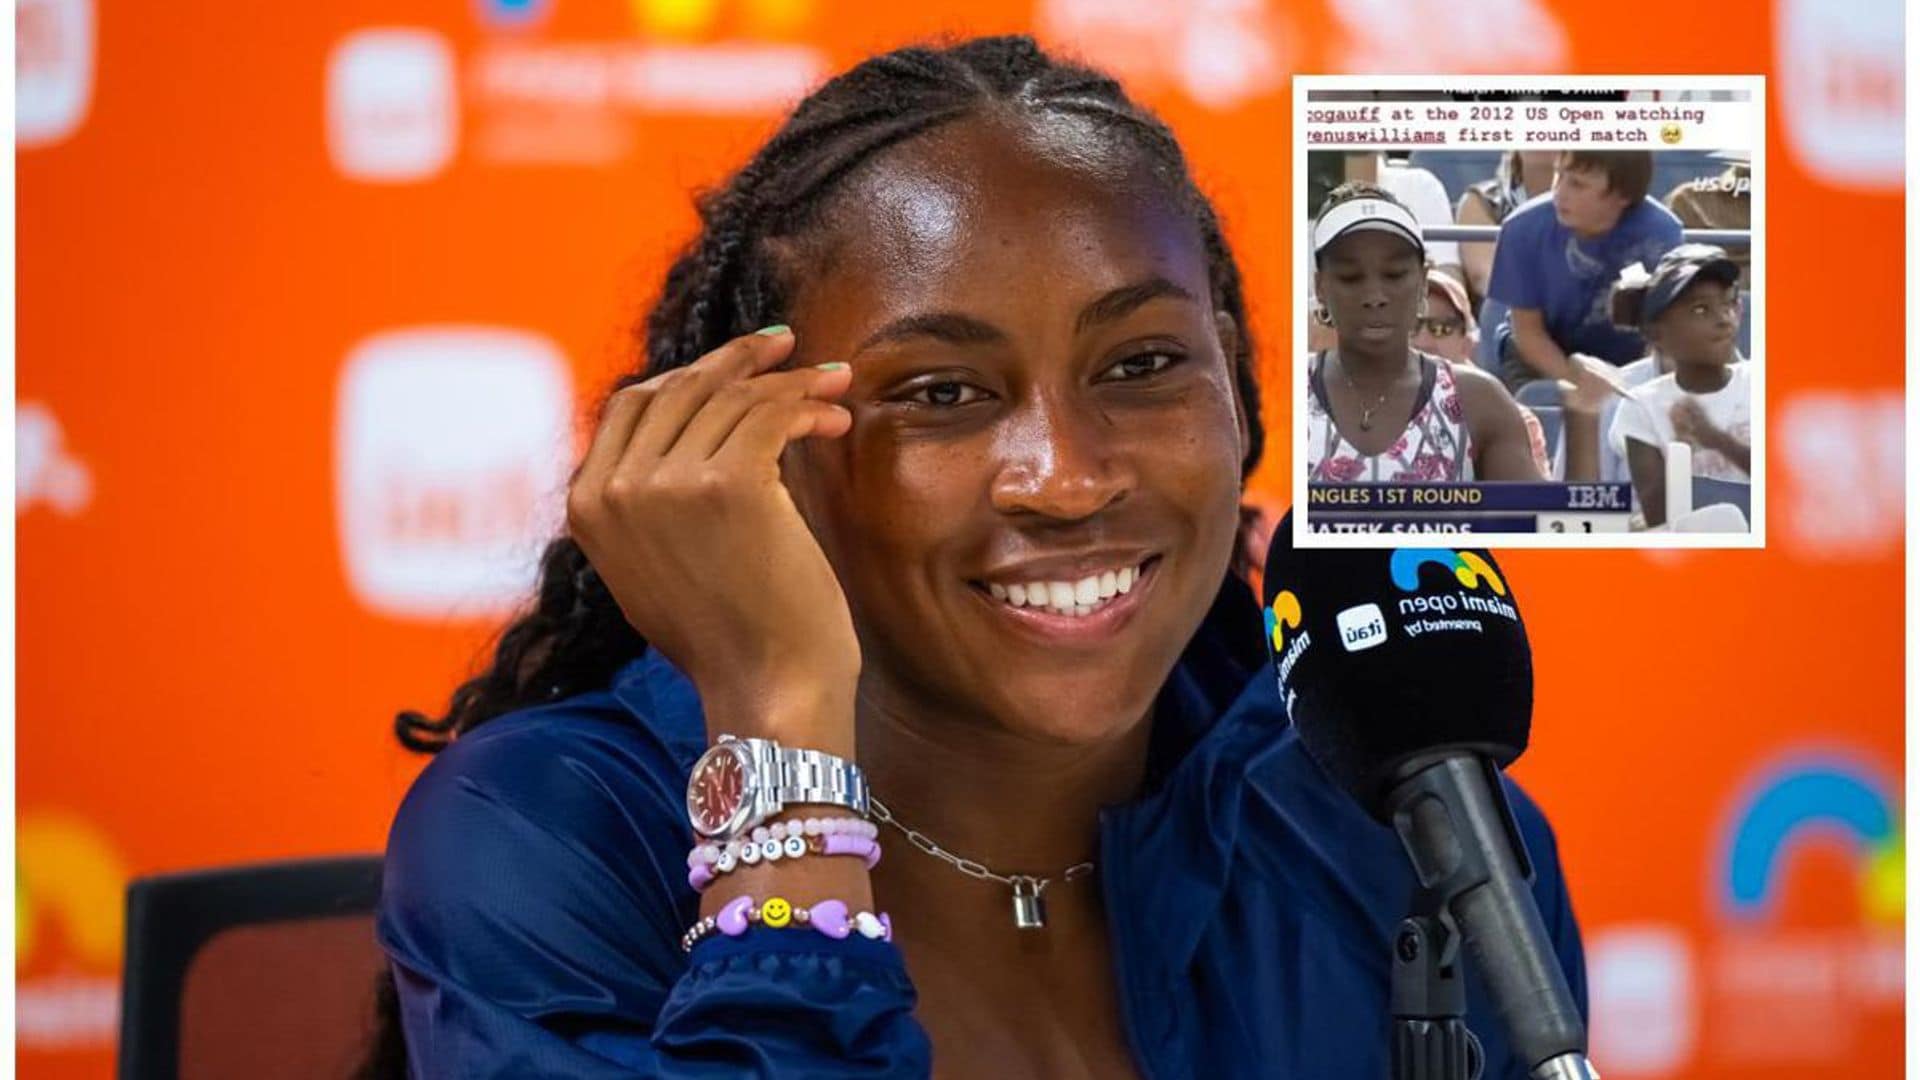 Coco Gauff’s throwback shows her 8-year-old self watching Venus Williams compete